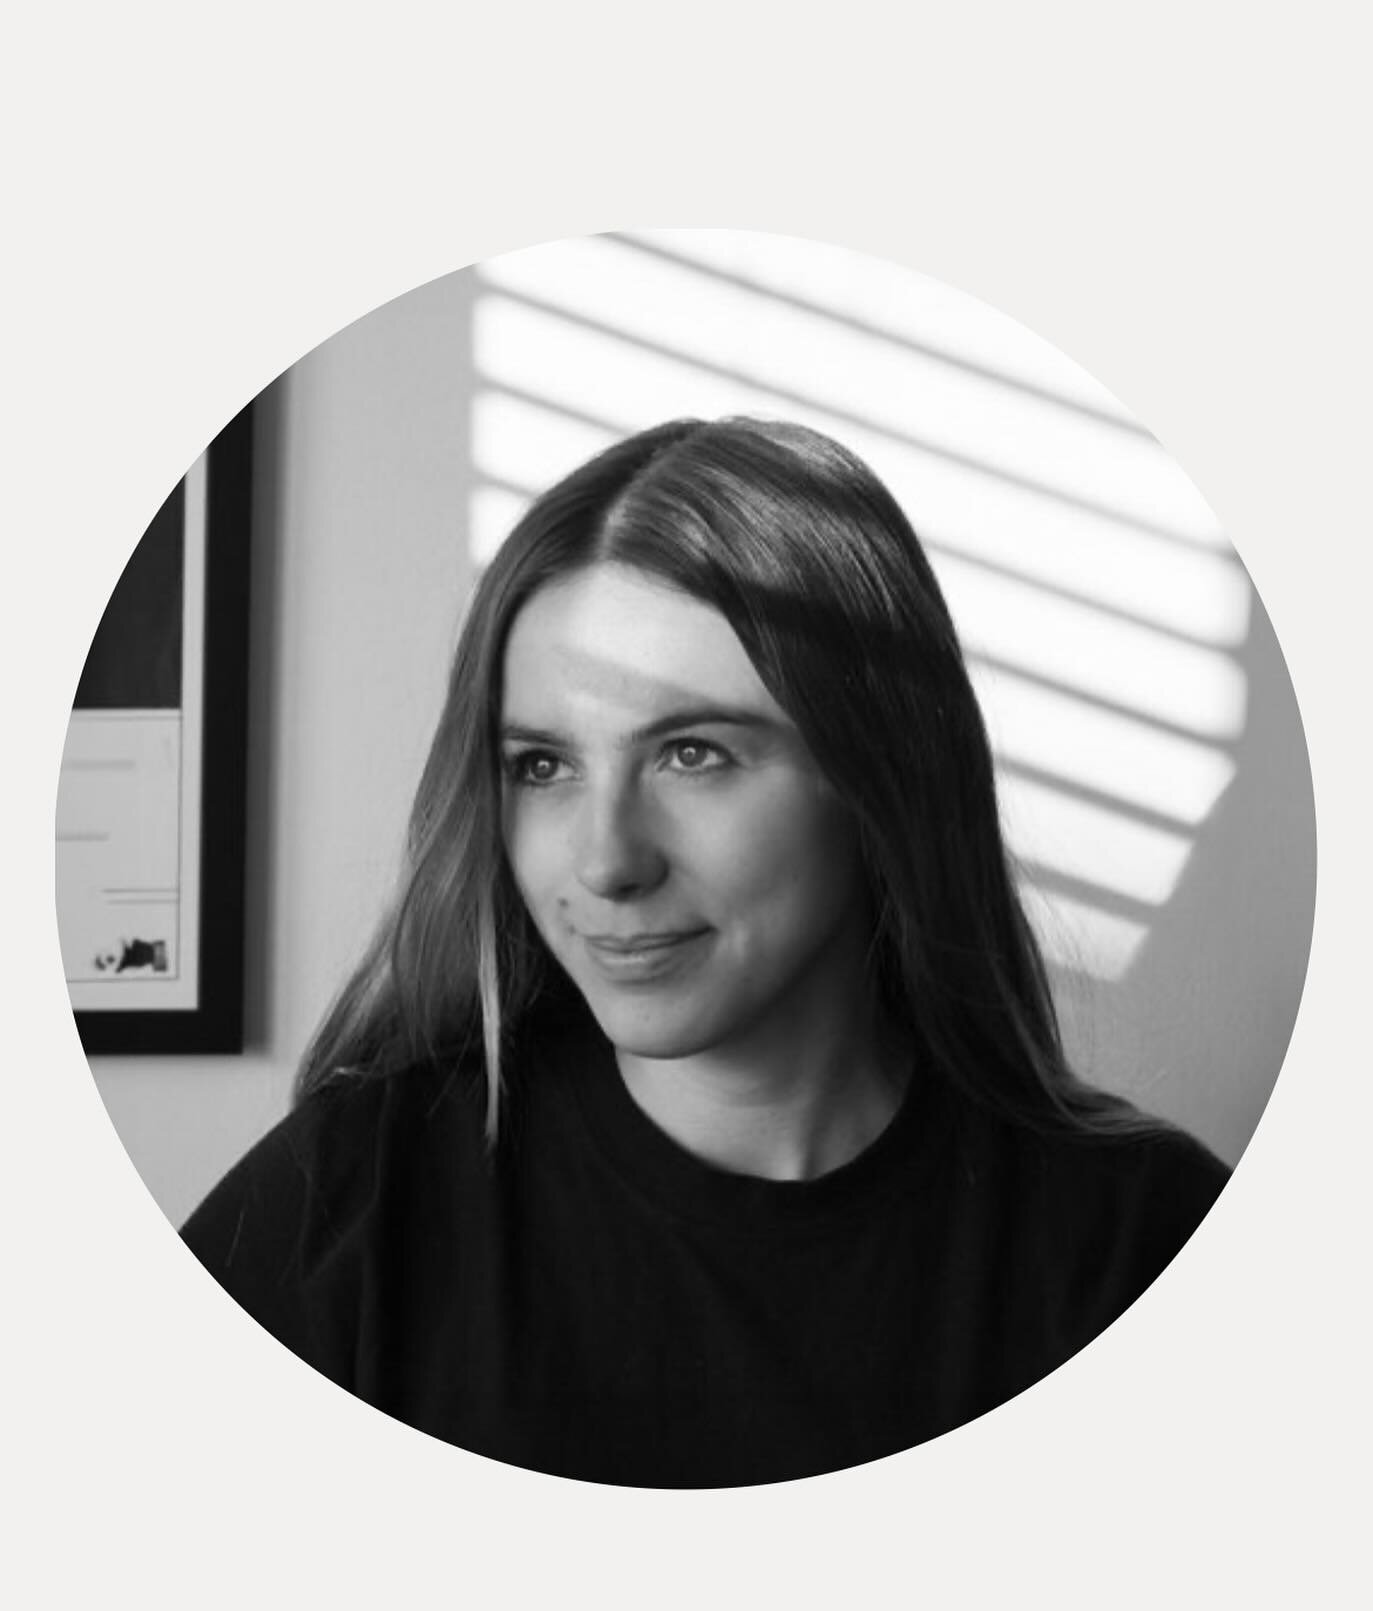 Let me introduce you to the wonder that is Darcy - our talented facialist here at Loop.
She&rsquo;s one of our newest team members and is also new to Bristol! Both Loop and Bristol are lucky to have her. She is sublime and has fitted right in, using 